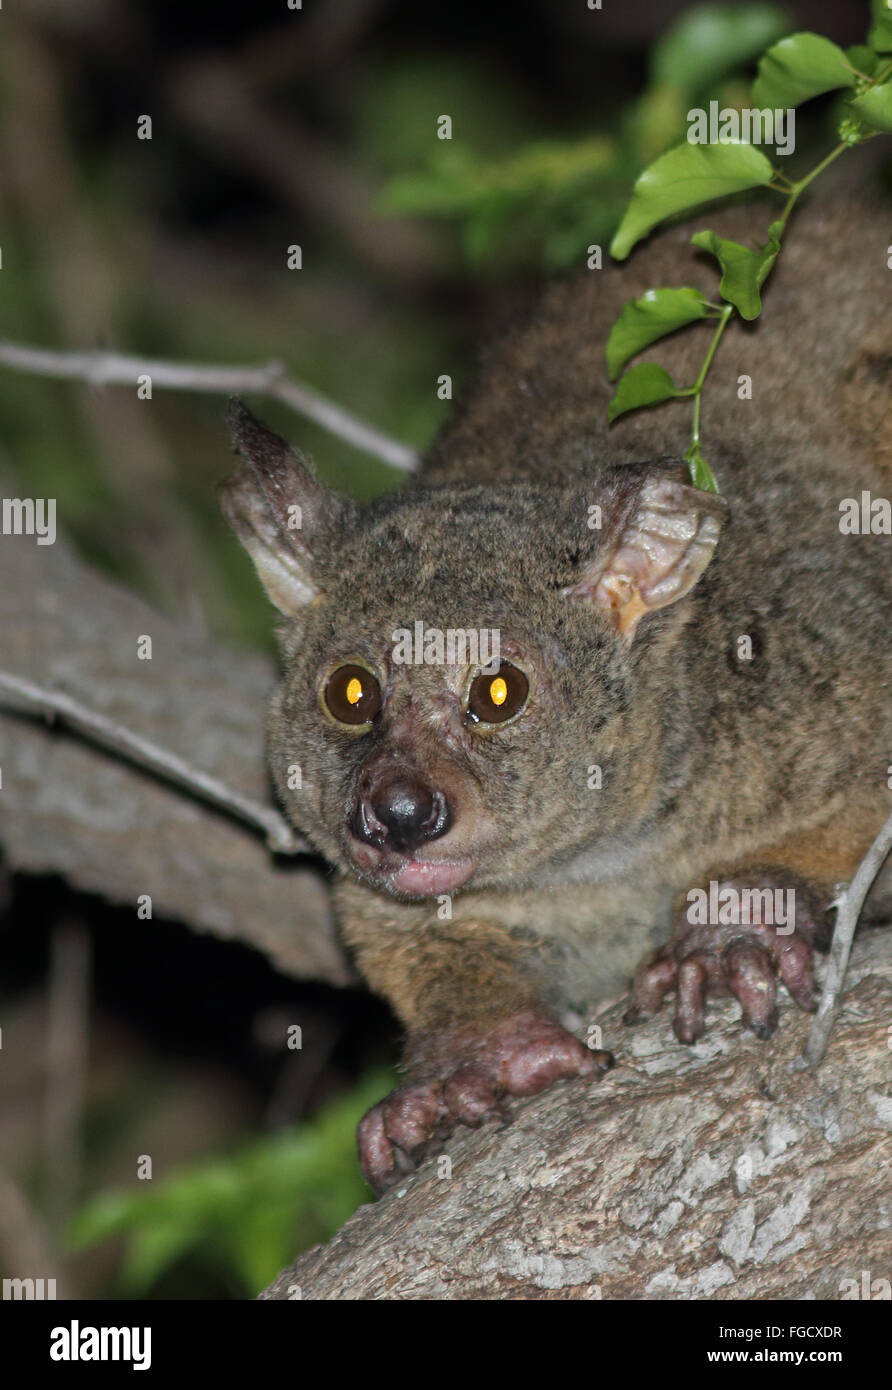 Brown Greater Galago (Otolemur crassicaudatus) adult, with skin condition, climbing on branch at night, Kruger N.P., Great Limpopo Transfrontier Park, South Africa, November Stock Photo